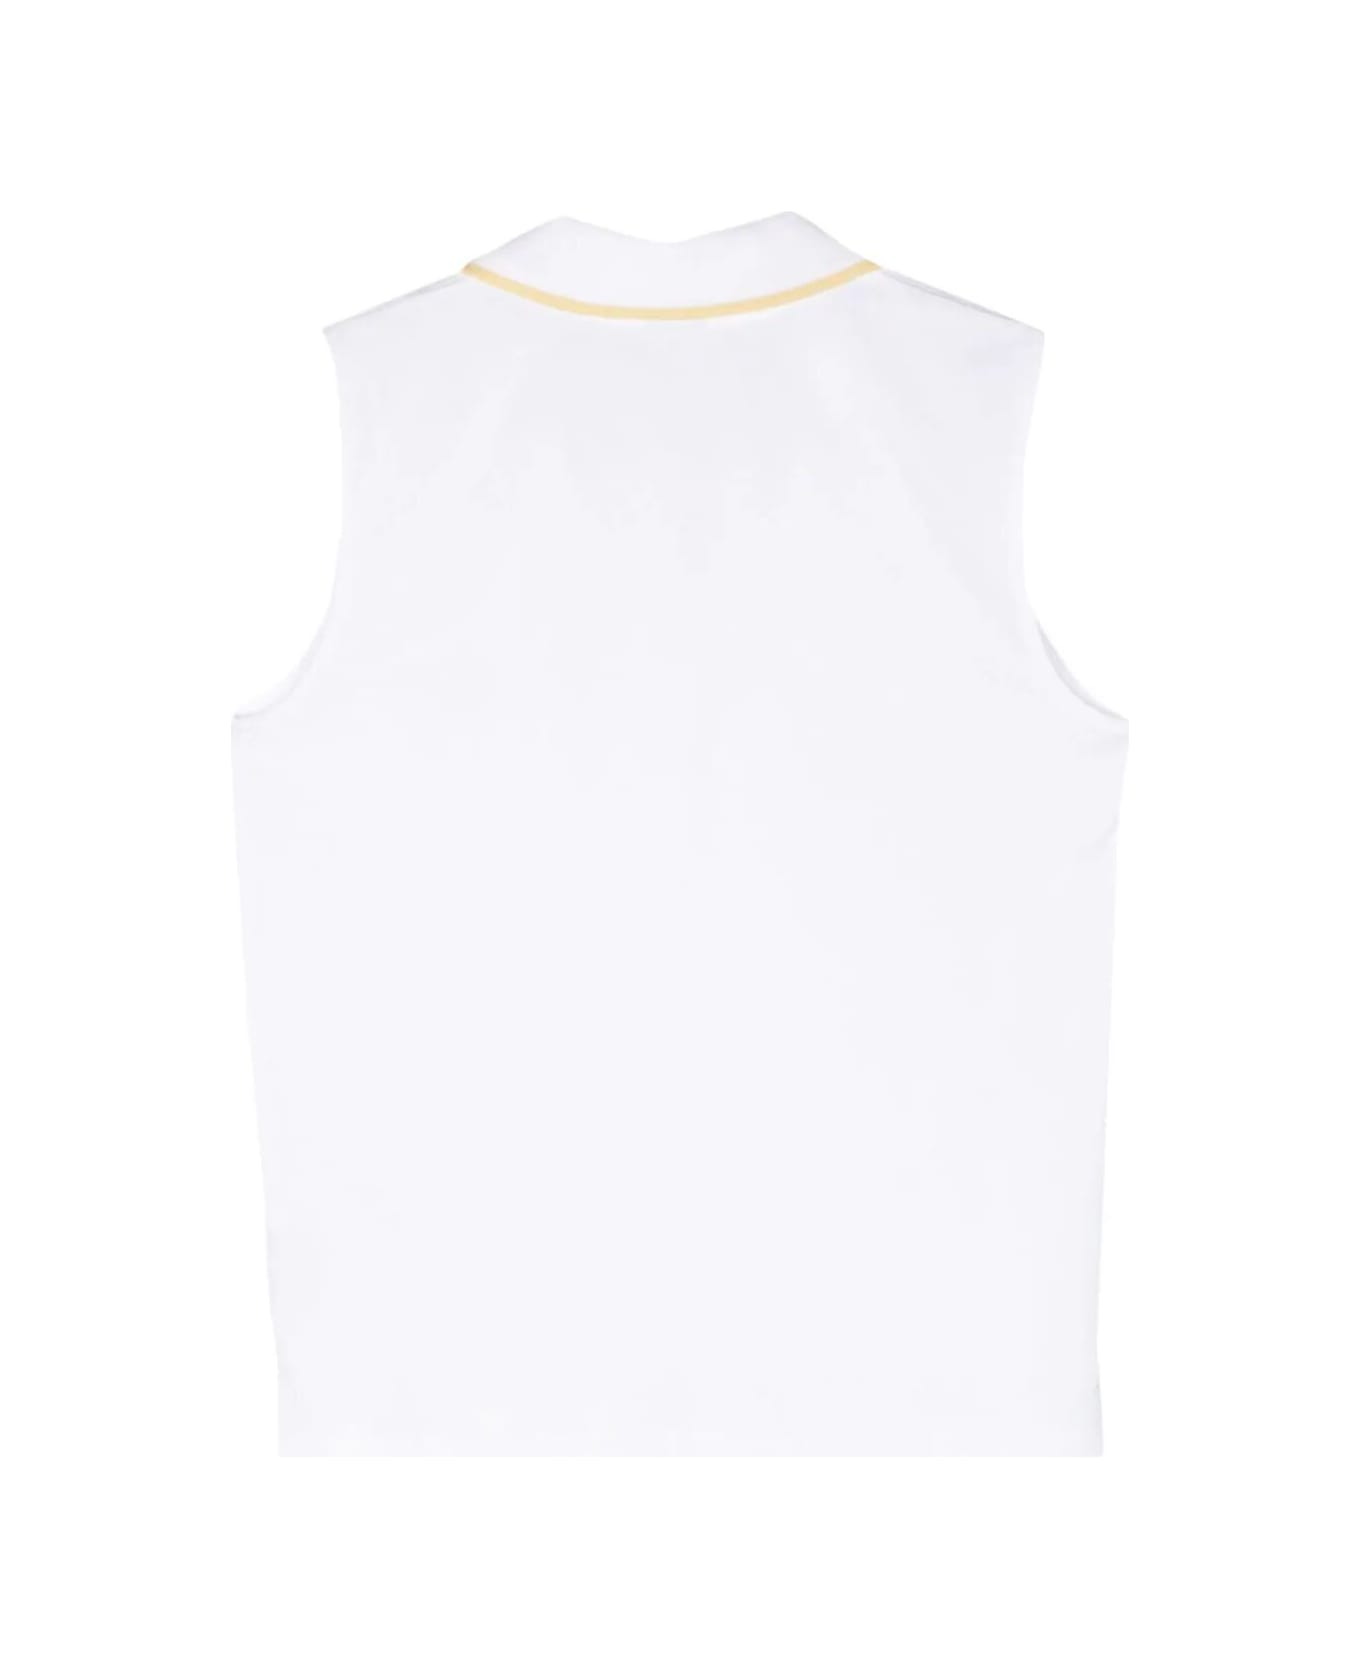 PS by Paul Smith Polo Top - White ポロシャツ